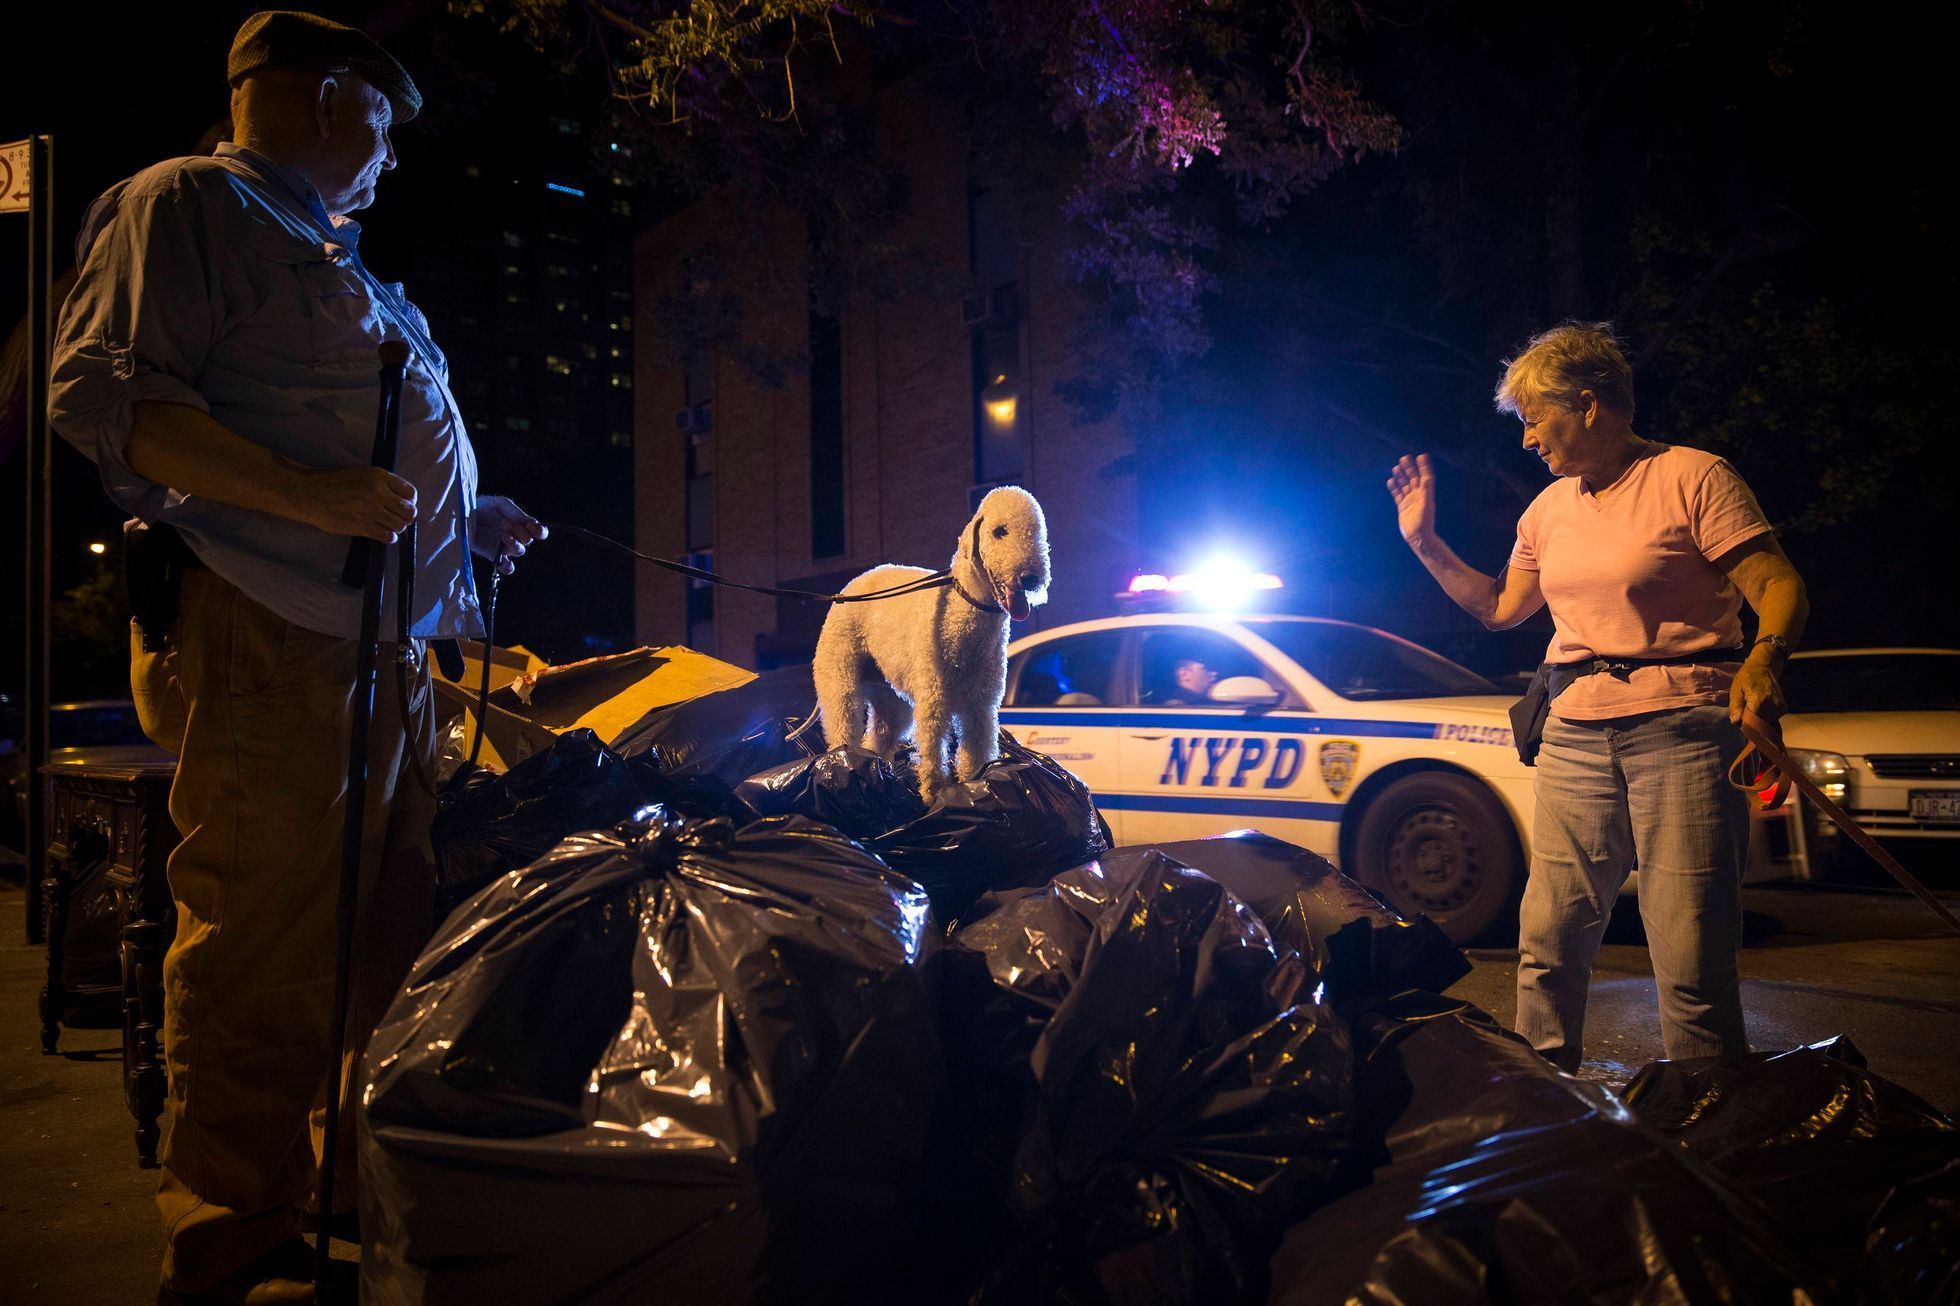 New York City Police patrol car passes as Reynolds, founding member of Ryders Alley Trencher-fed Society looks on and his Bedlington Terrier, Catcher, stands on a pile of garbage bags during organized